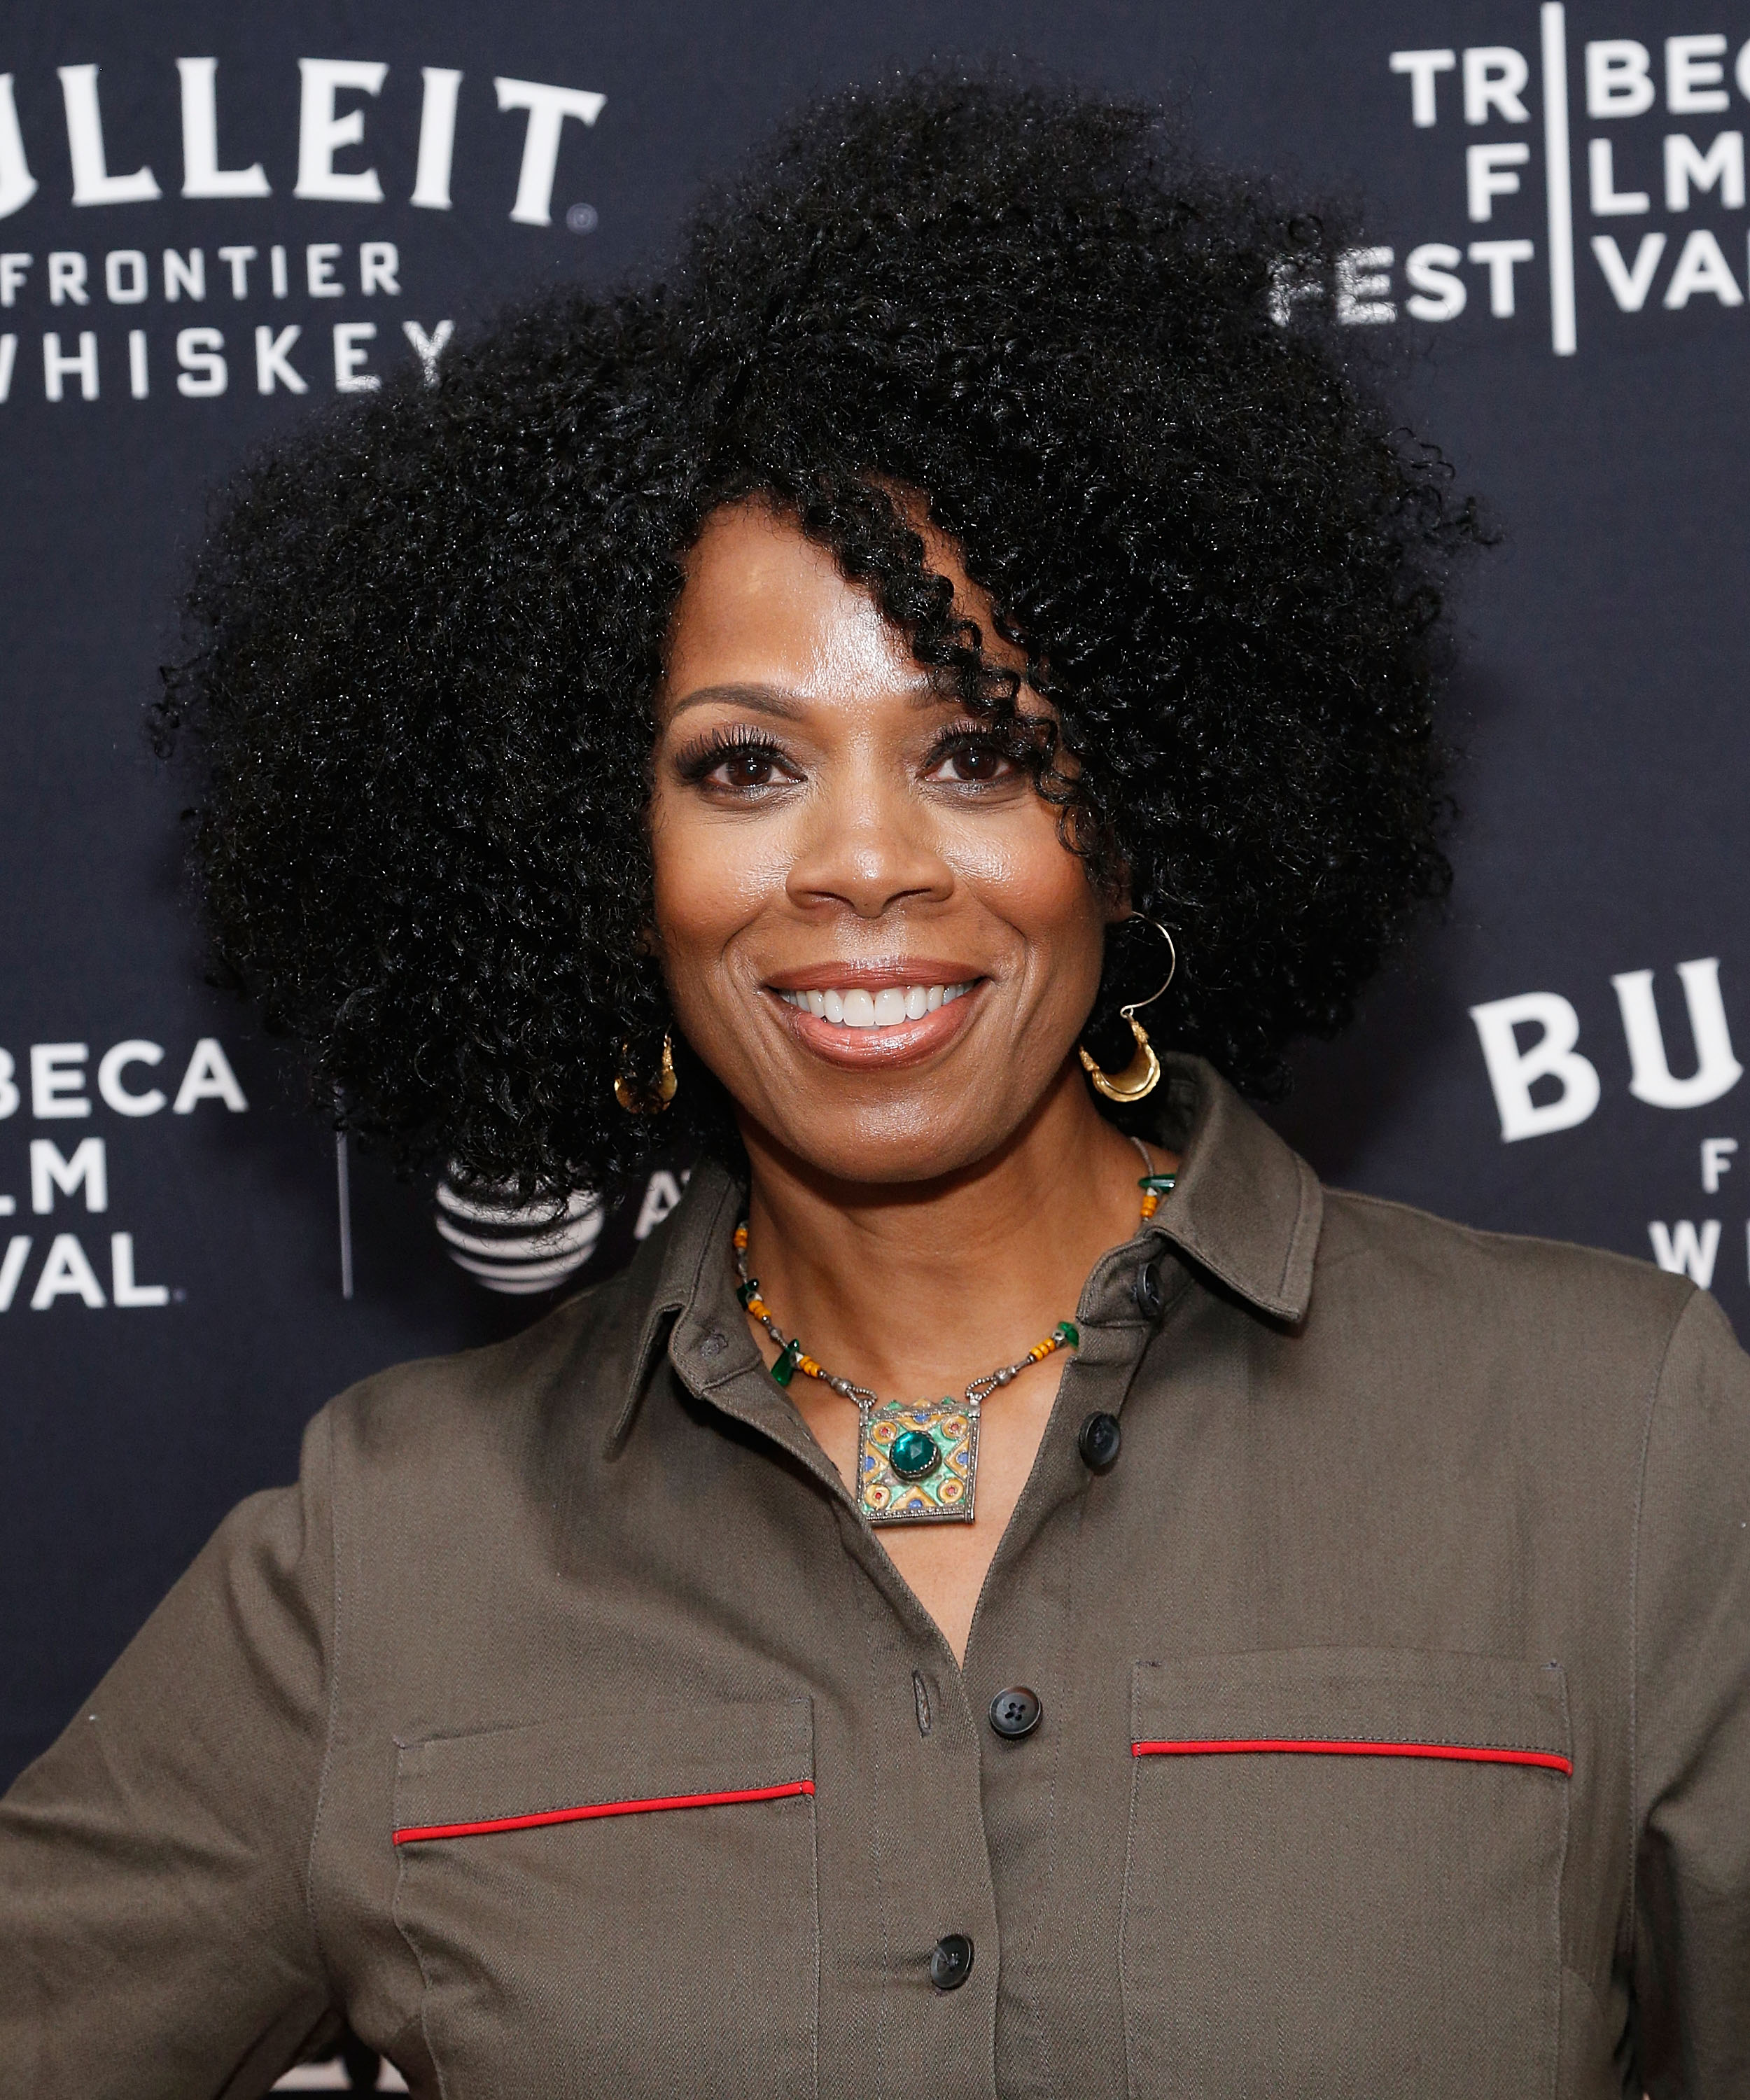 Kim Wayans at the Tribeca Film Festival after-party for "In Living Color" on April 27, 2019, in New York City. | Source: Getty Images